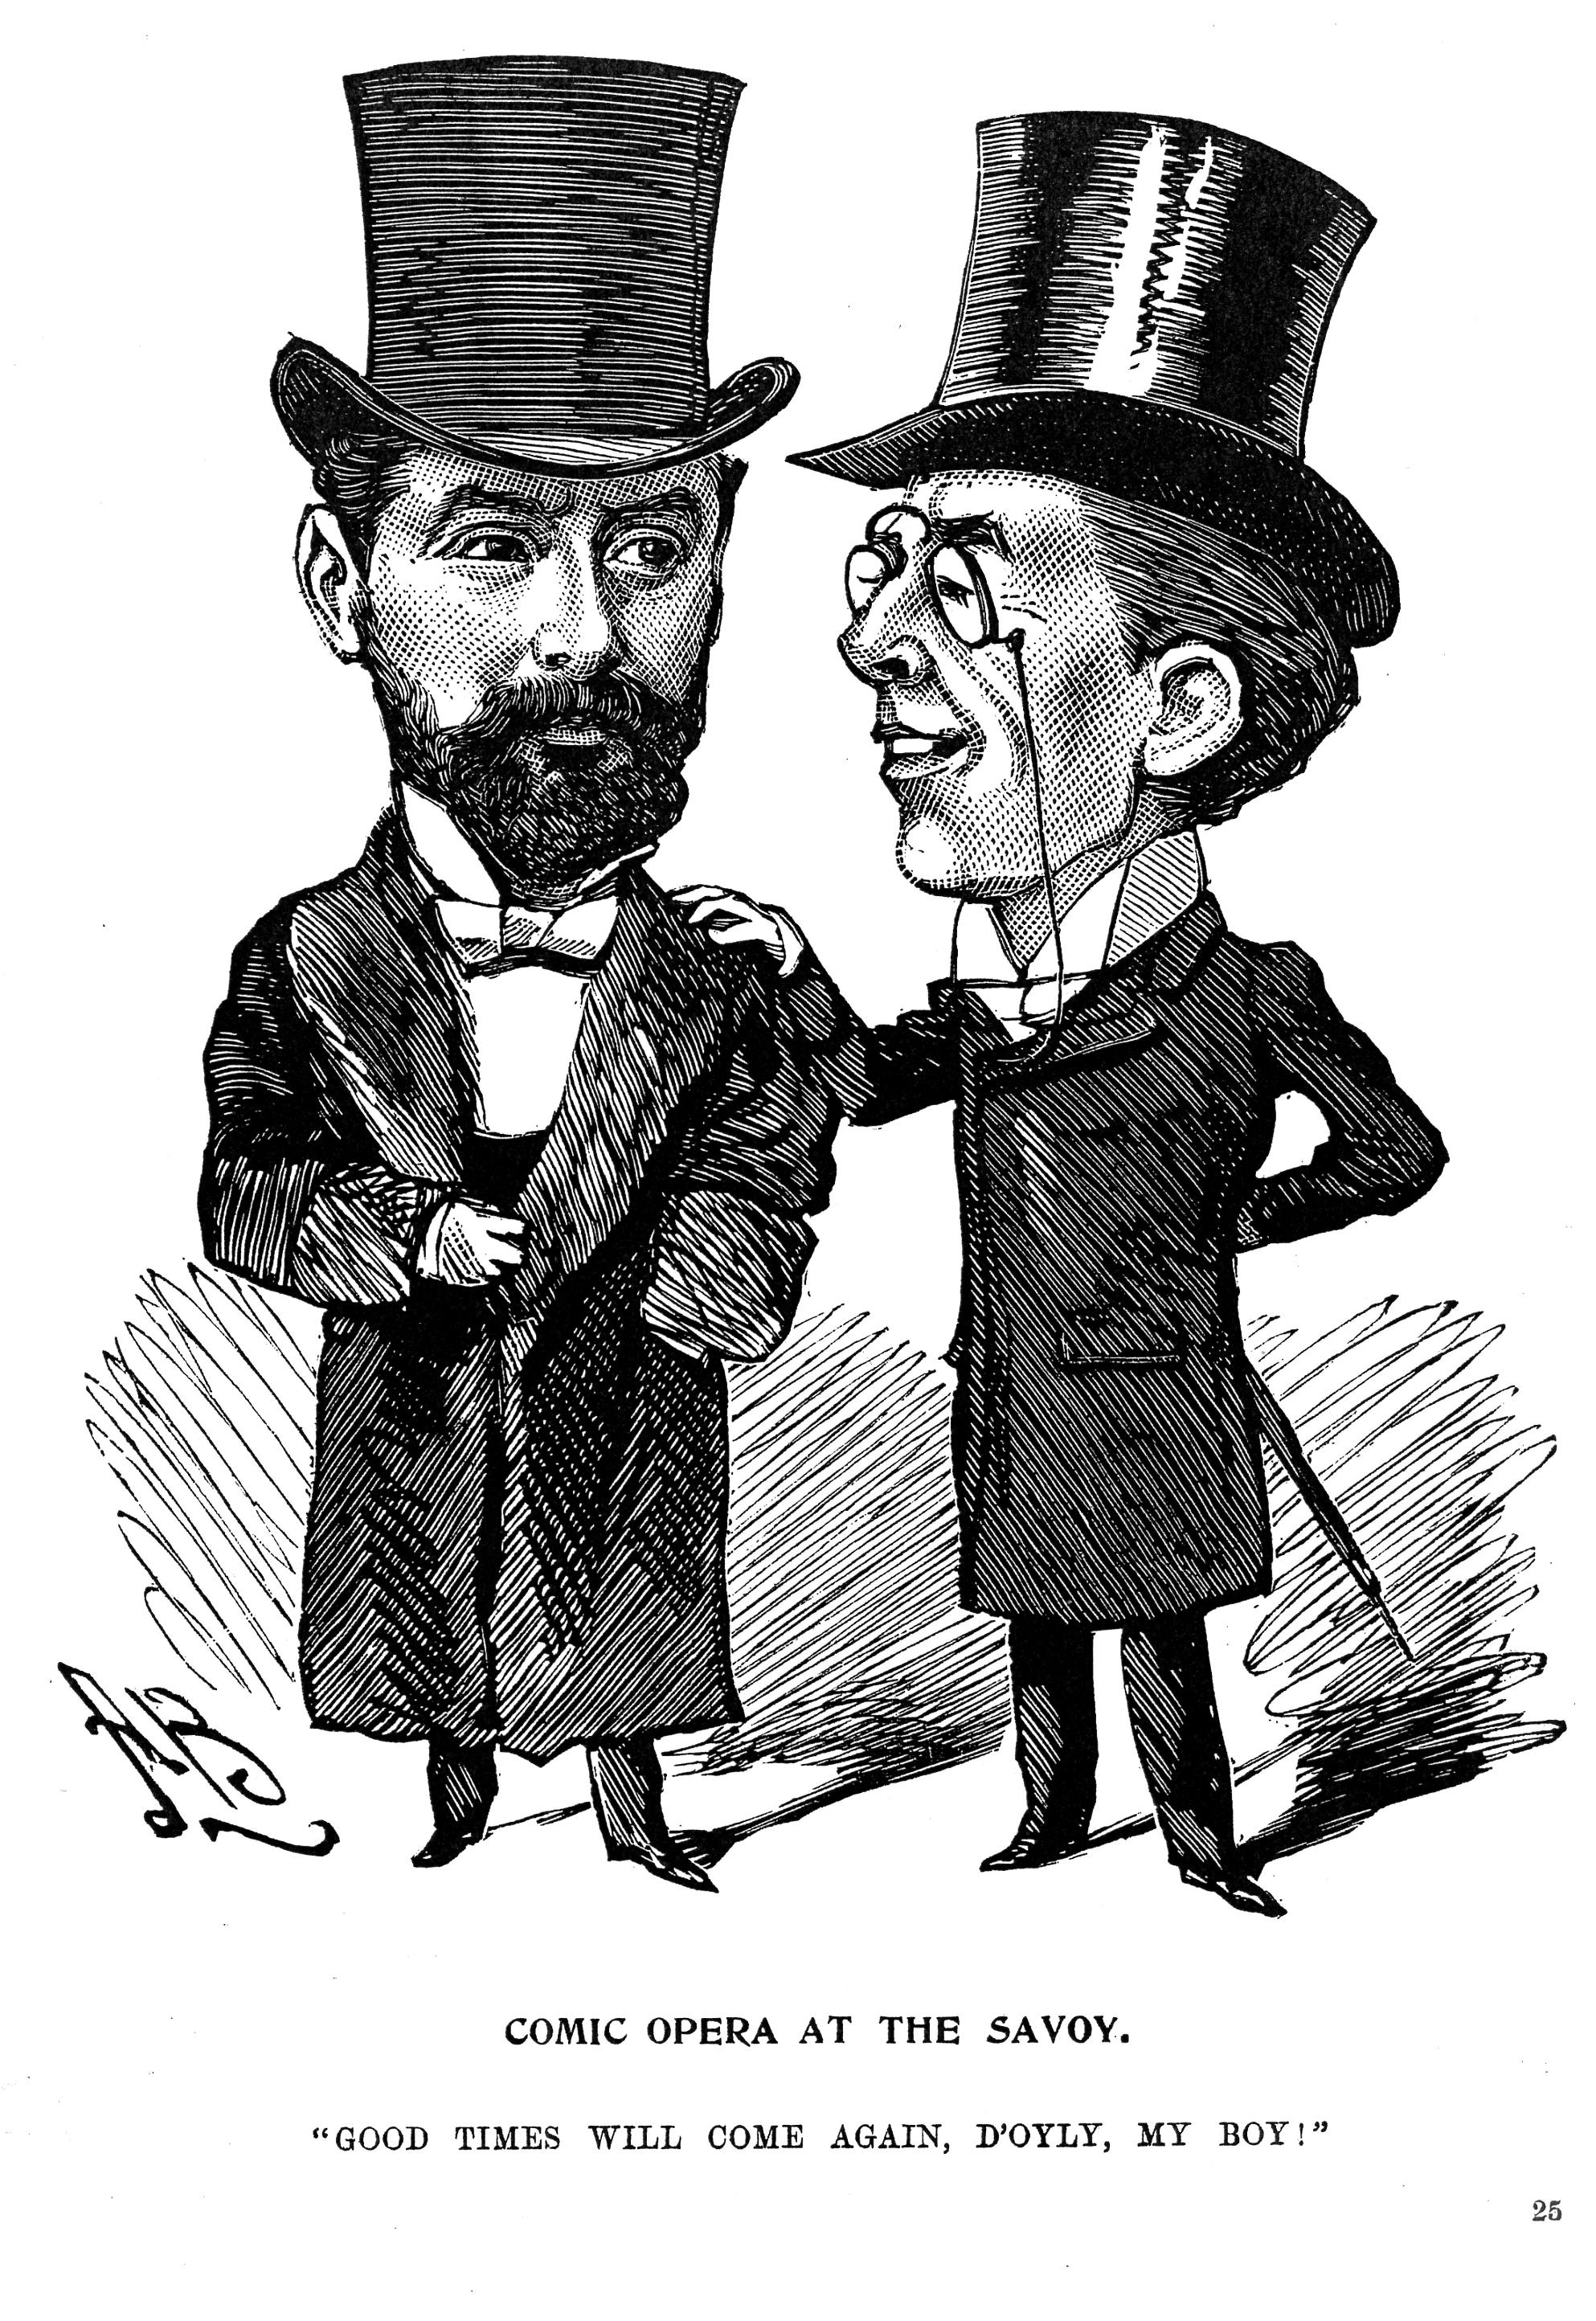 Grossmith attempts to cheer up D'Oyly Carte after the failure of the last Gilbert and Sullivan opera, The Grand Duke